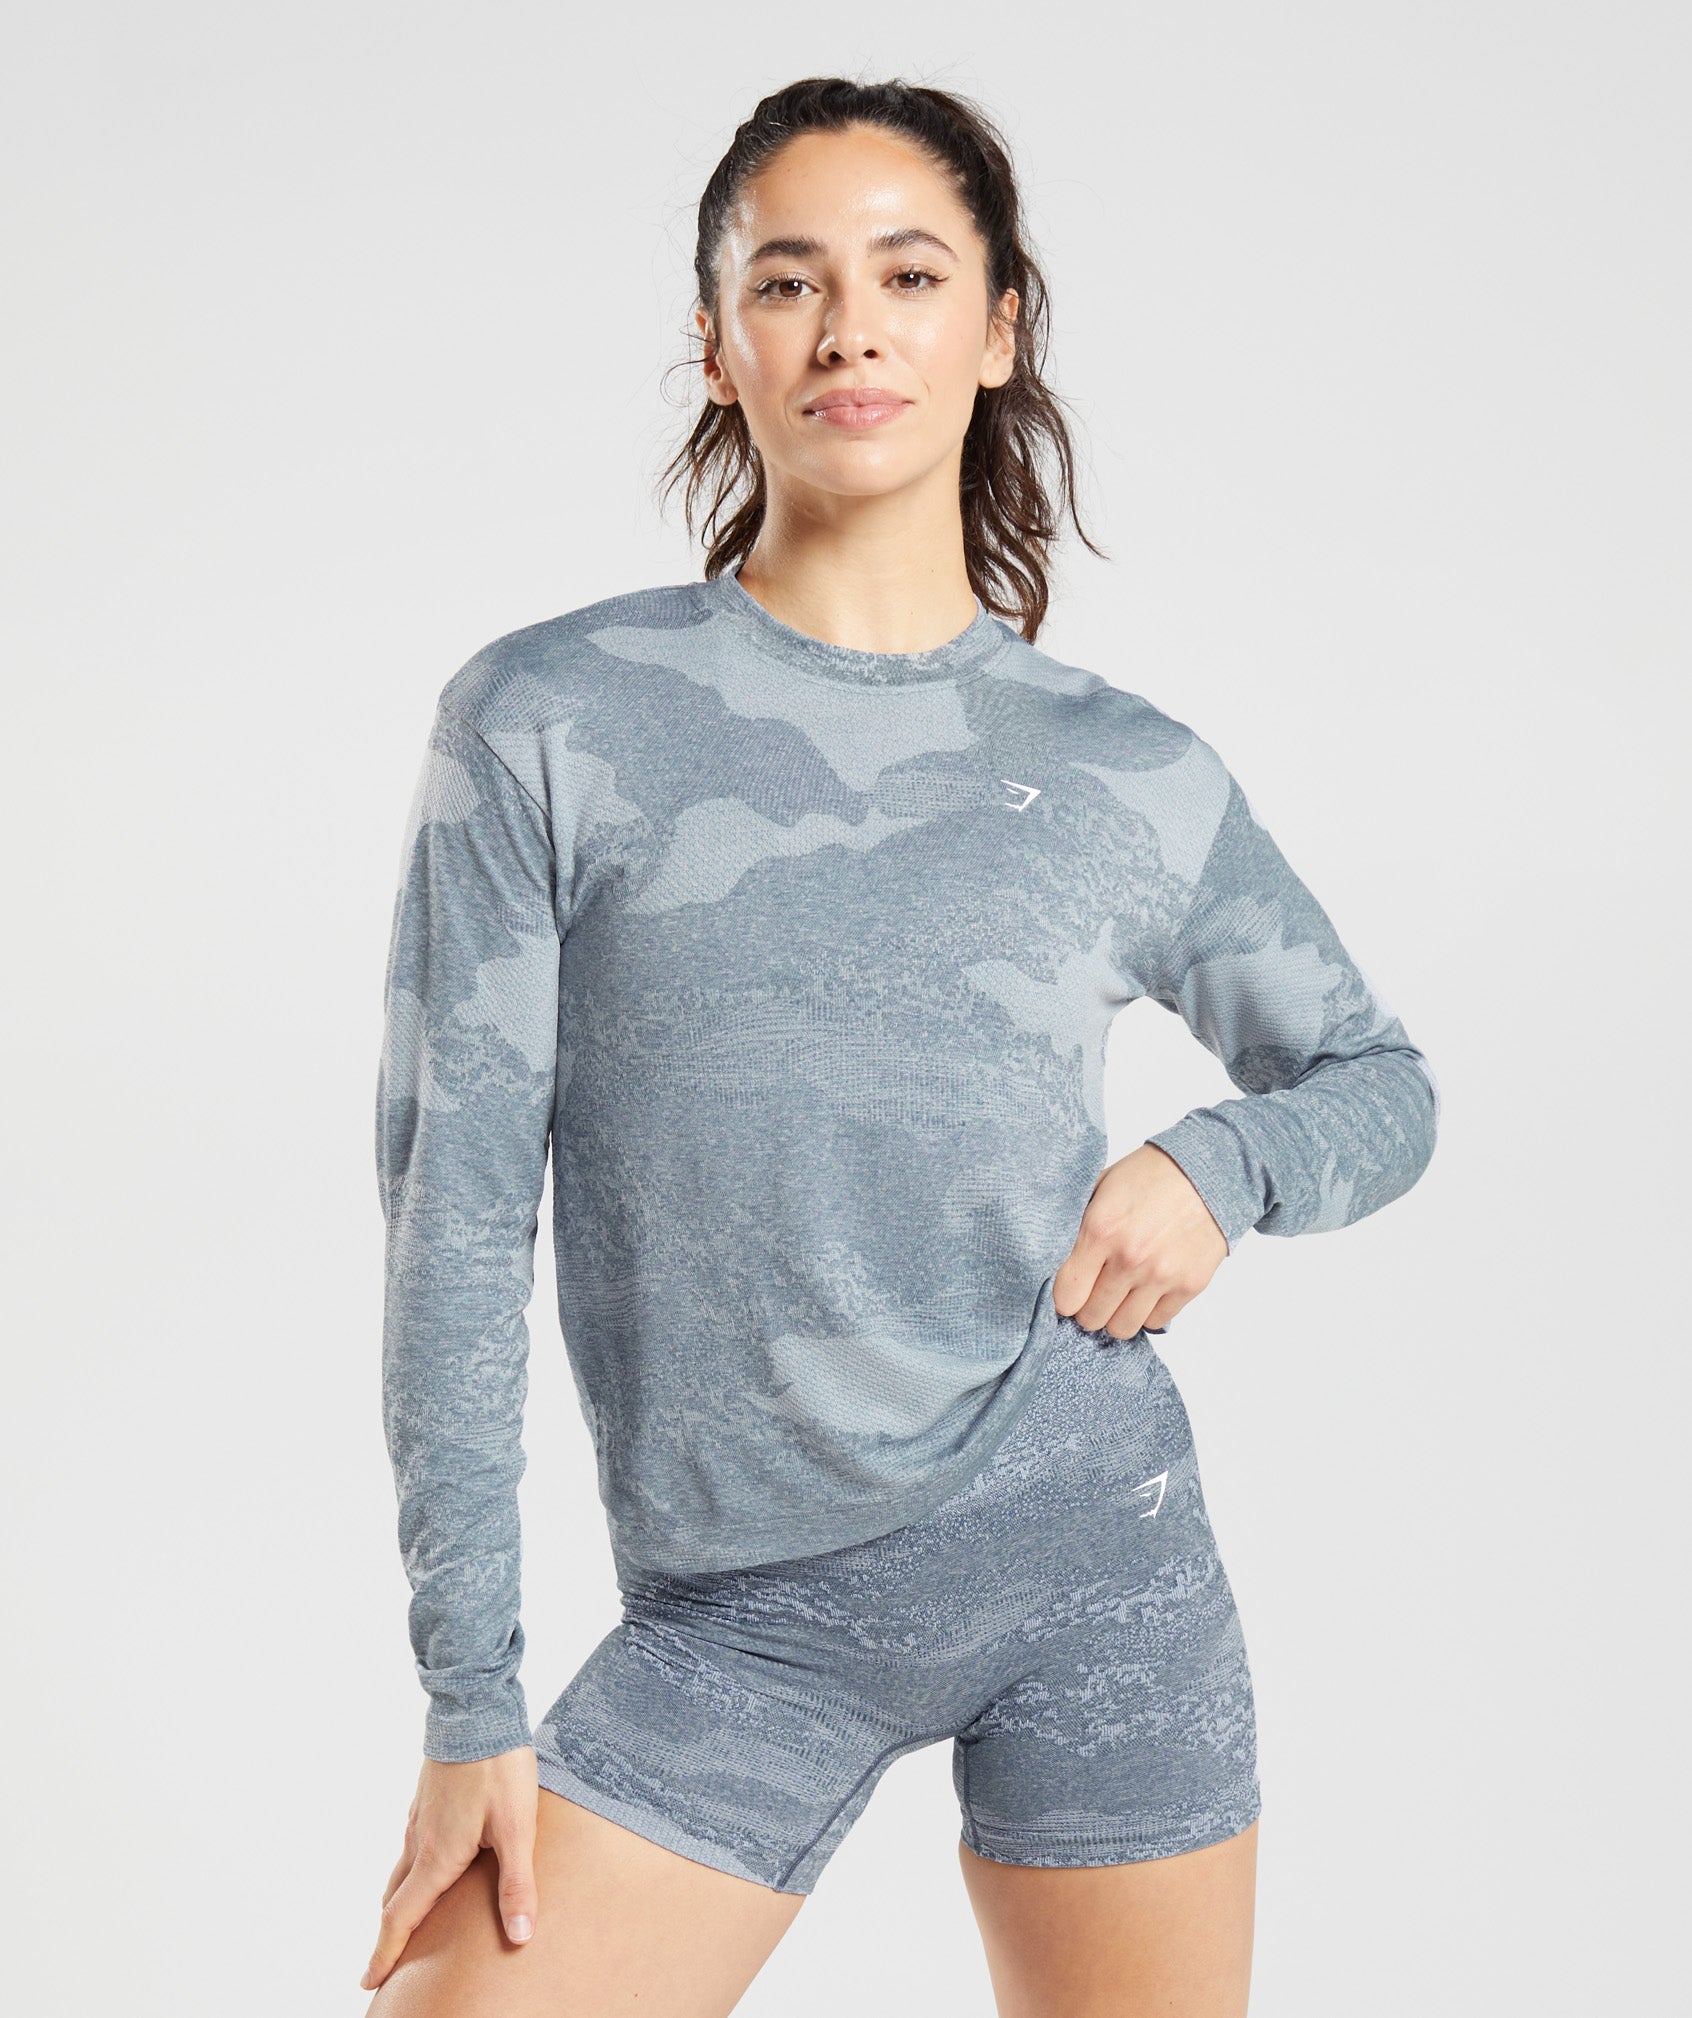 Adapt Camo Seamless Long Sleeve Top in River Stone Grey/Evening Blue